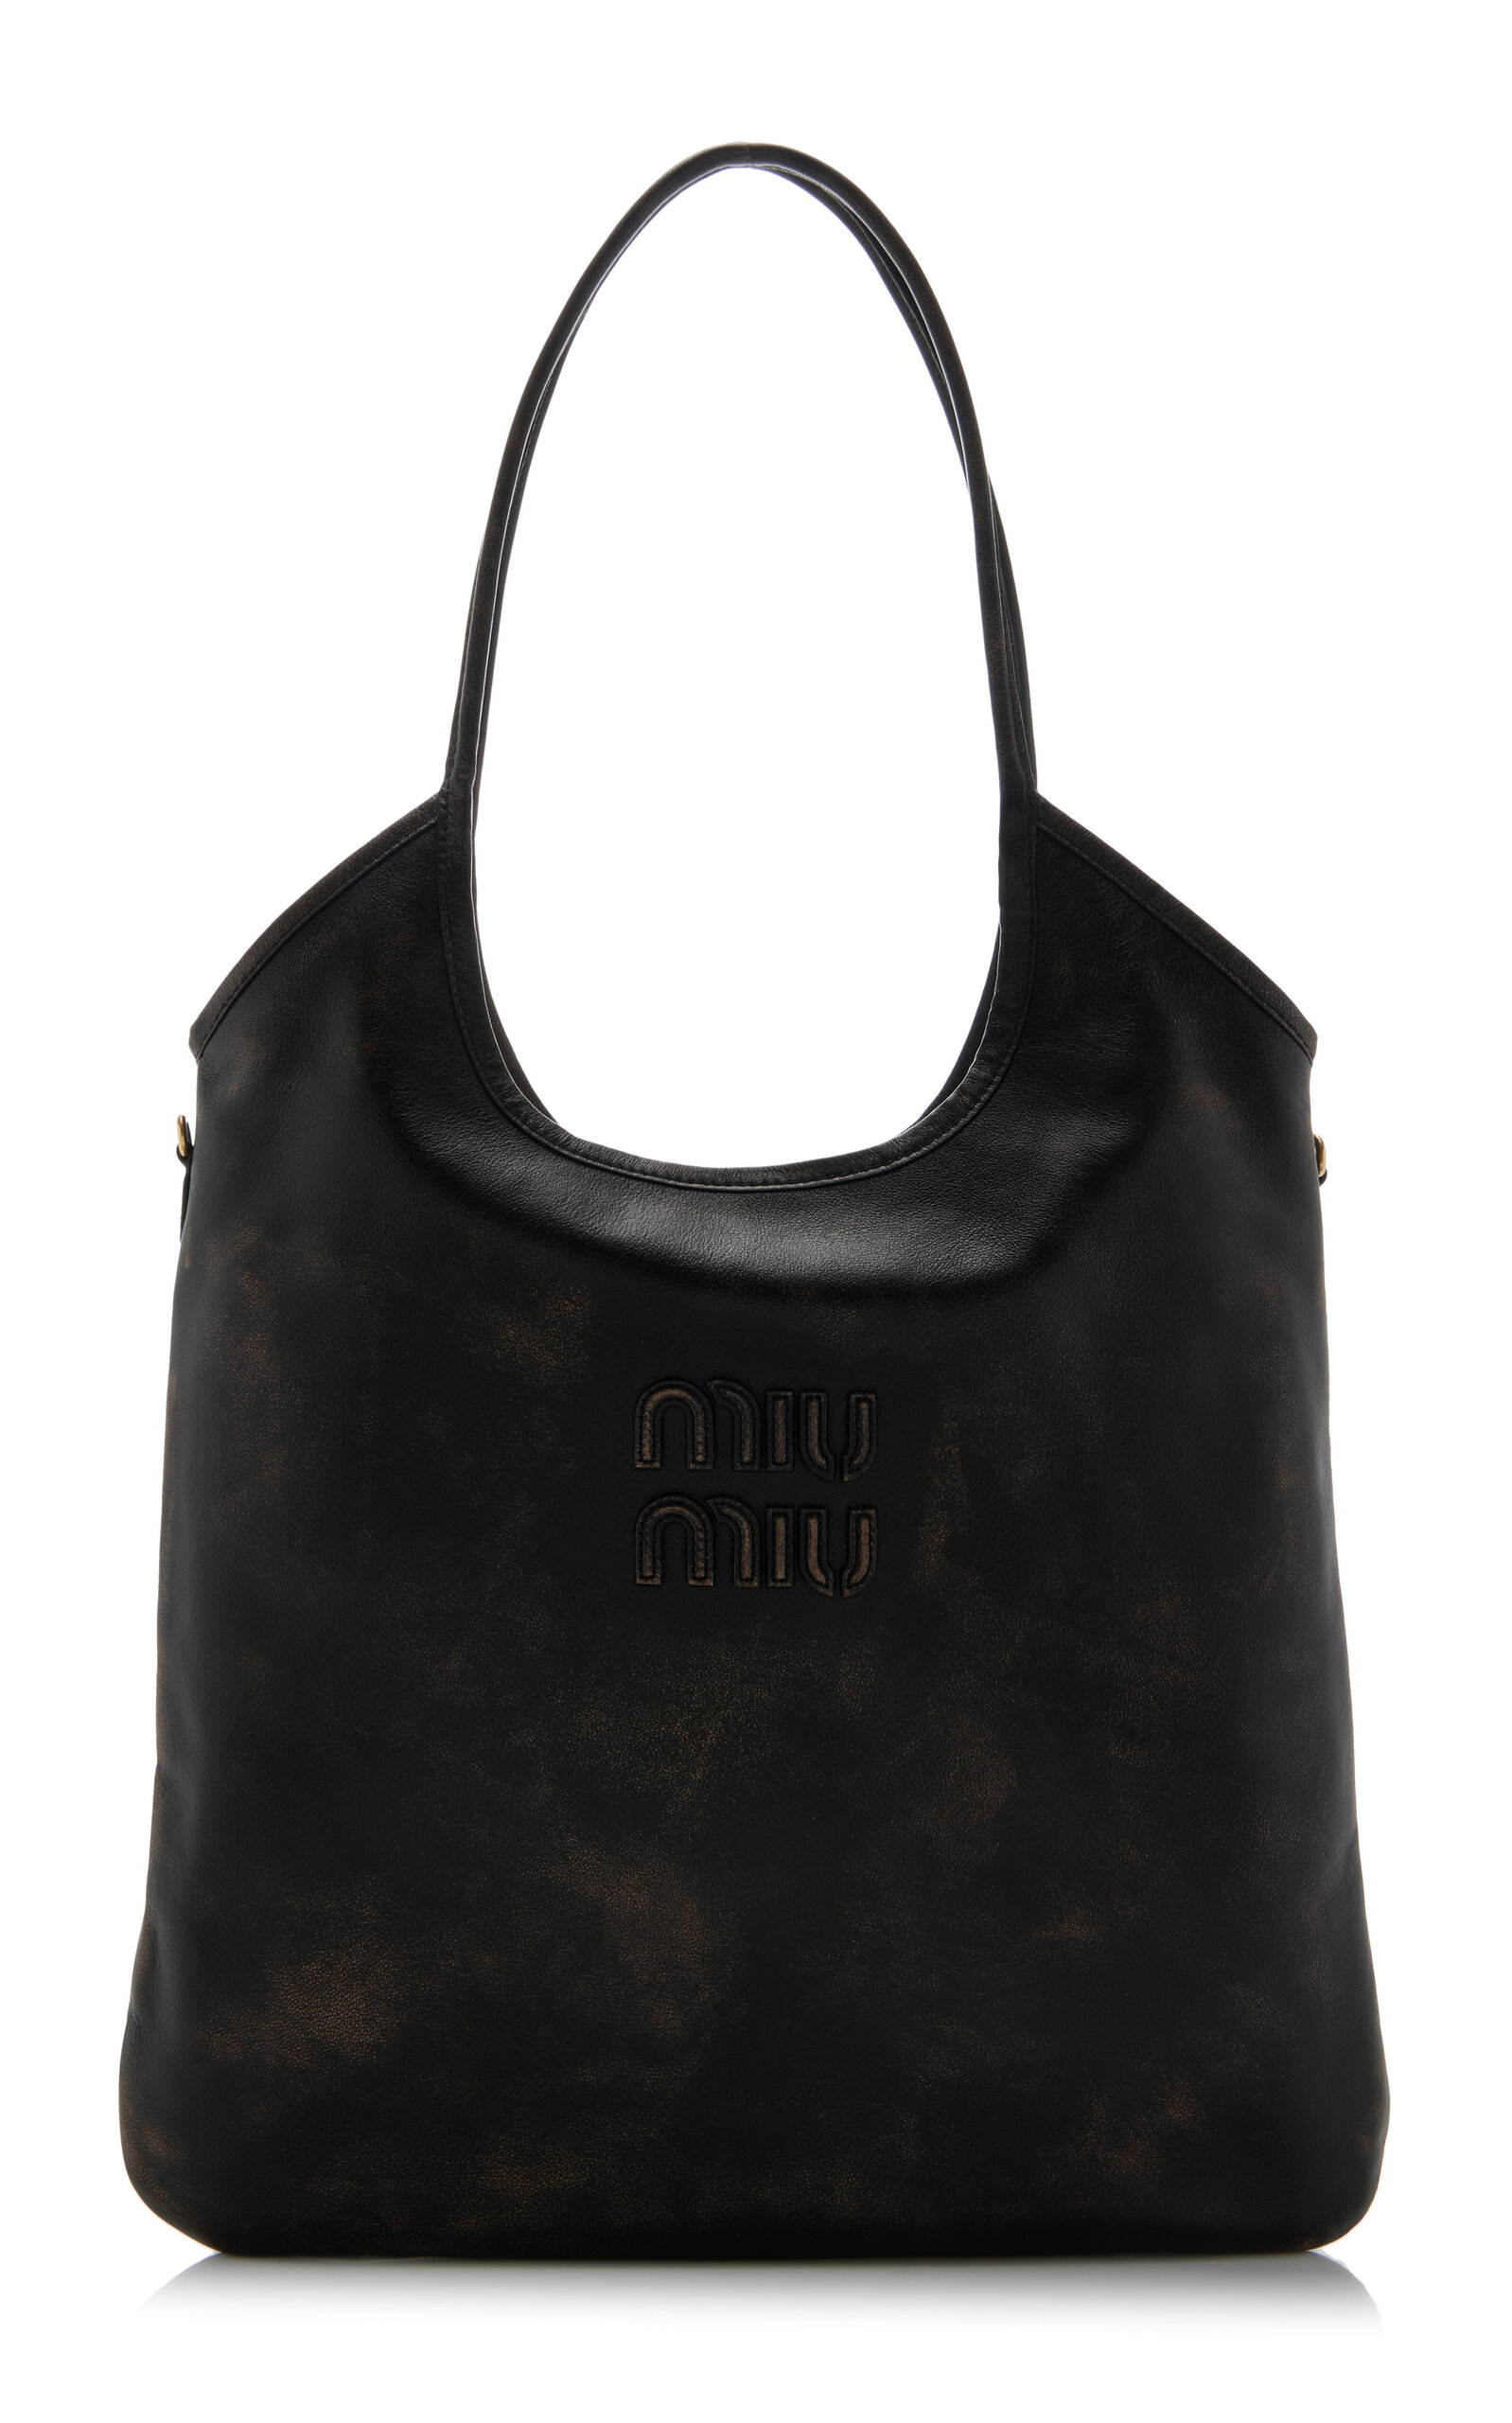 Worn Leather Tote Bag